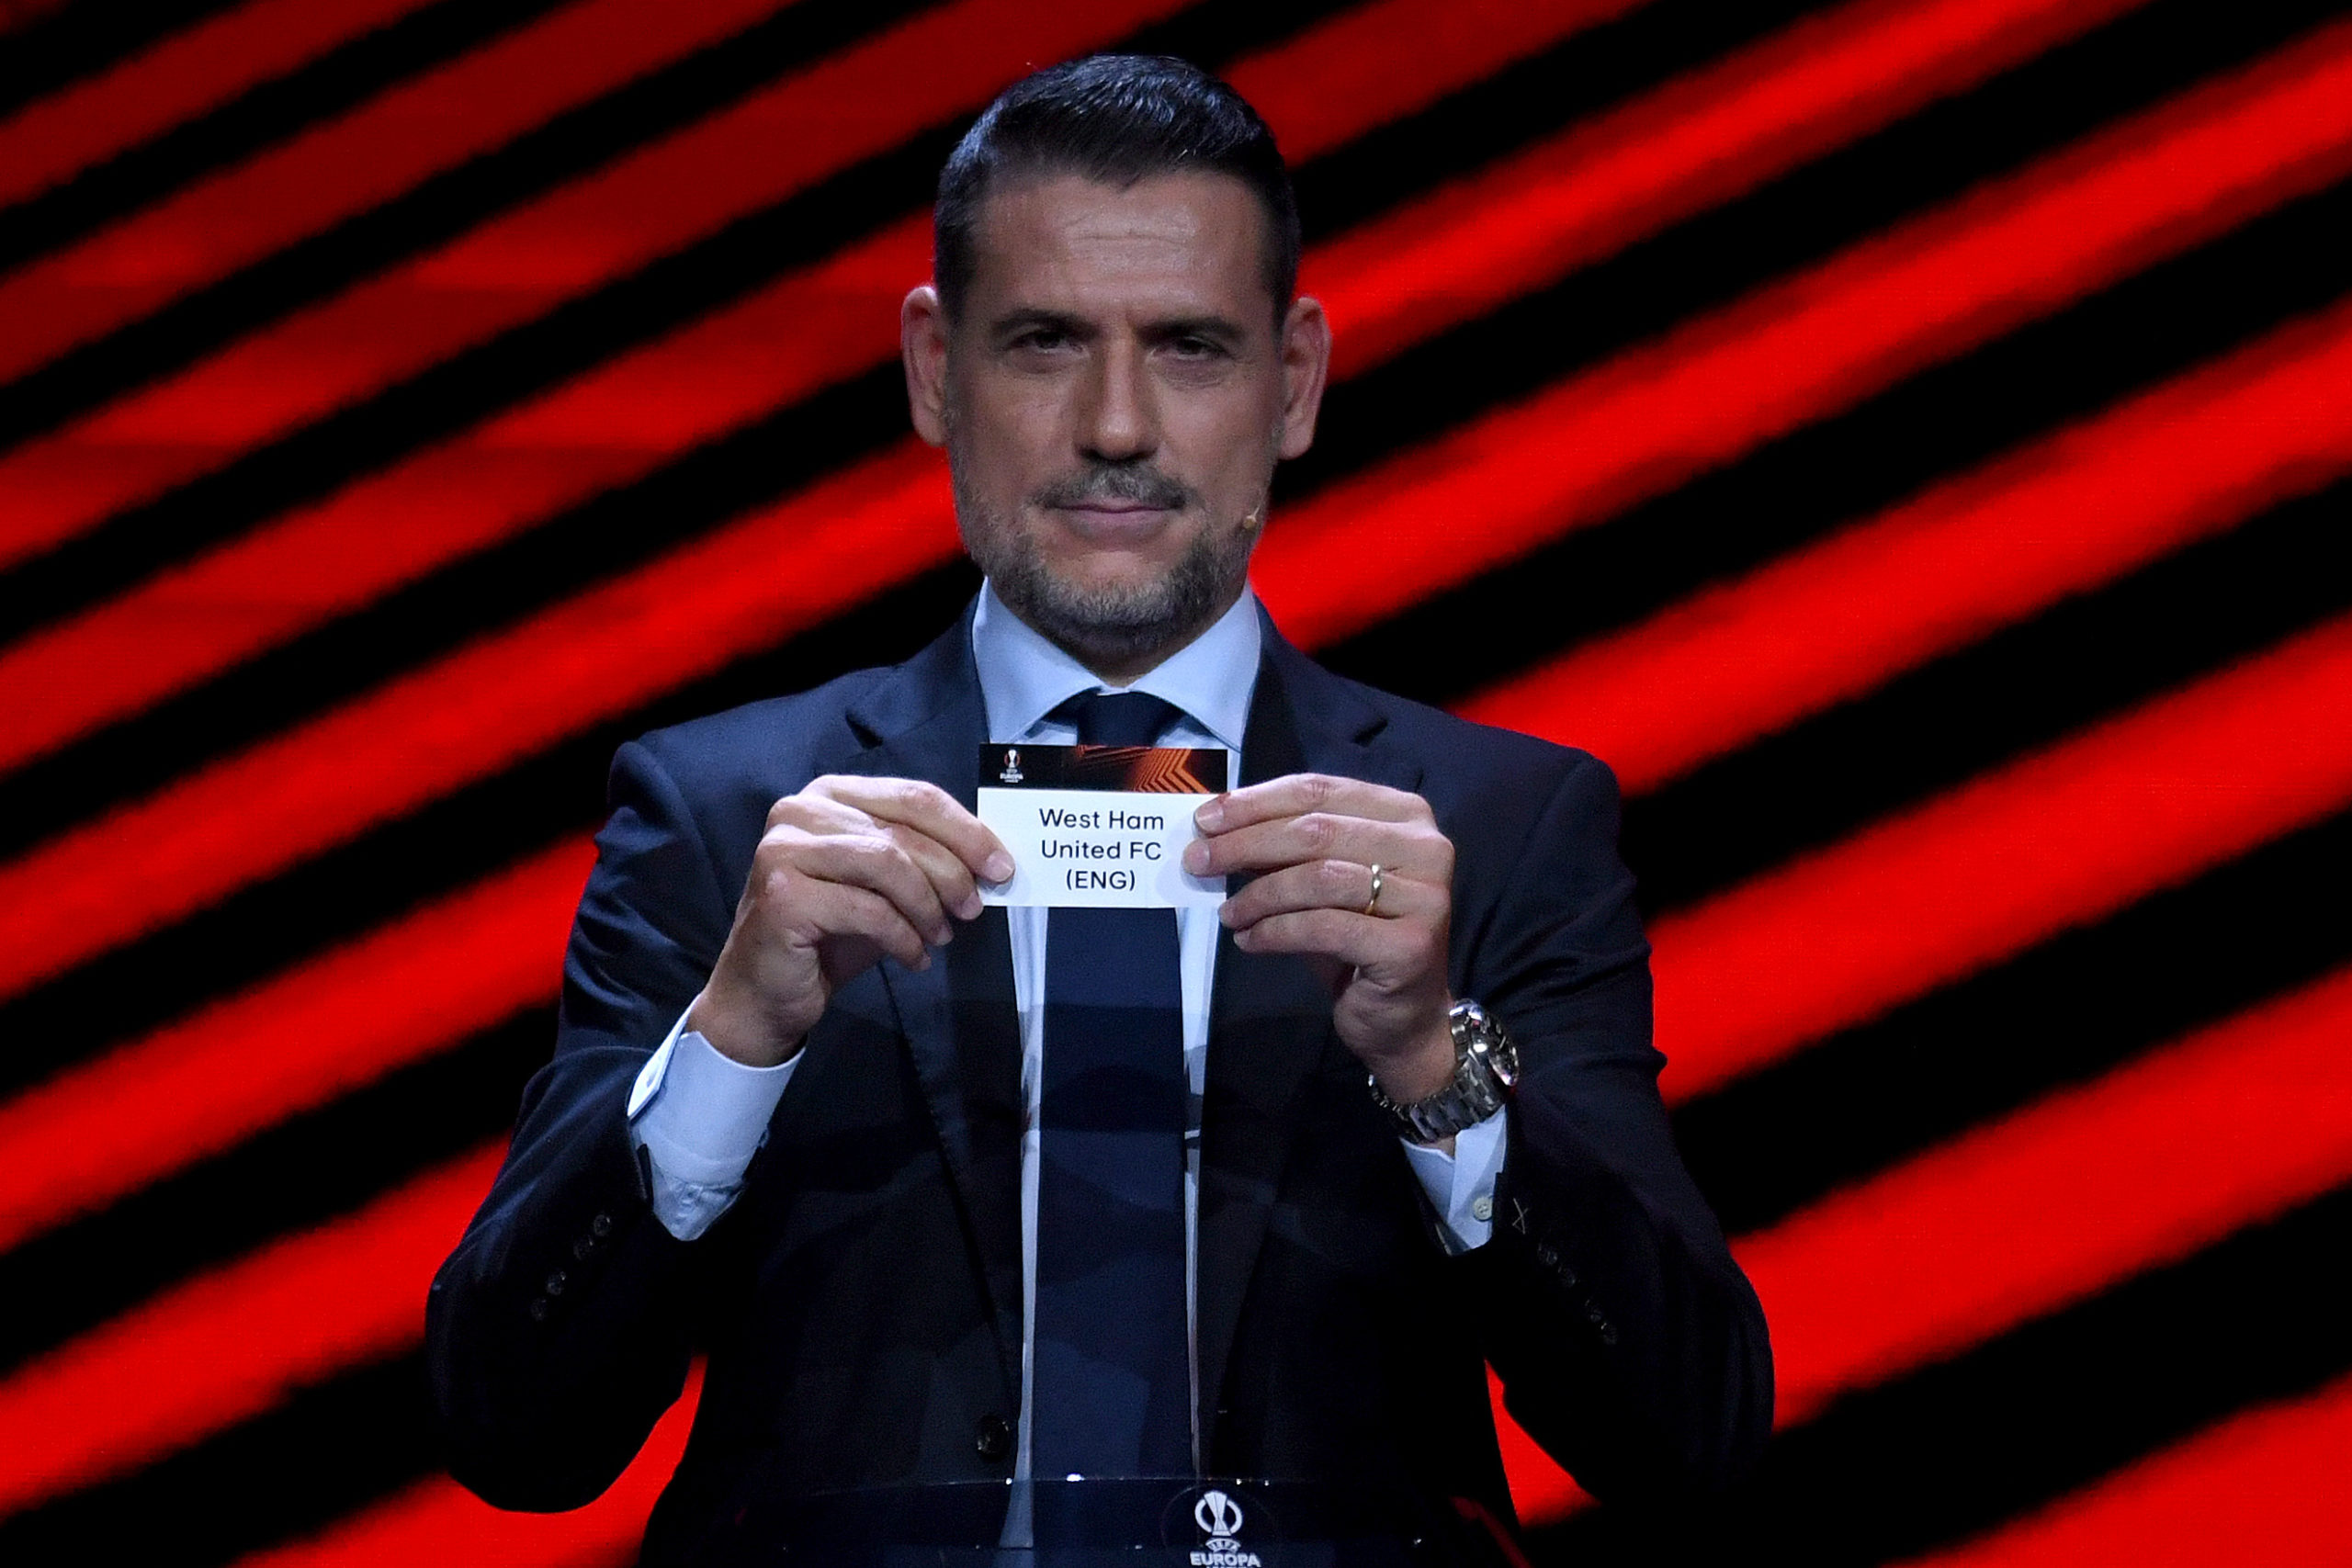 West Ham were in the hat for the UEFA Europa League Last 16 draw this morning